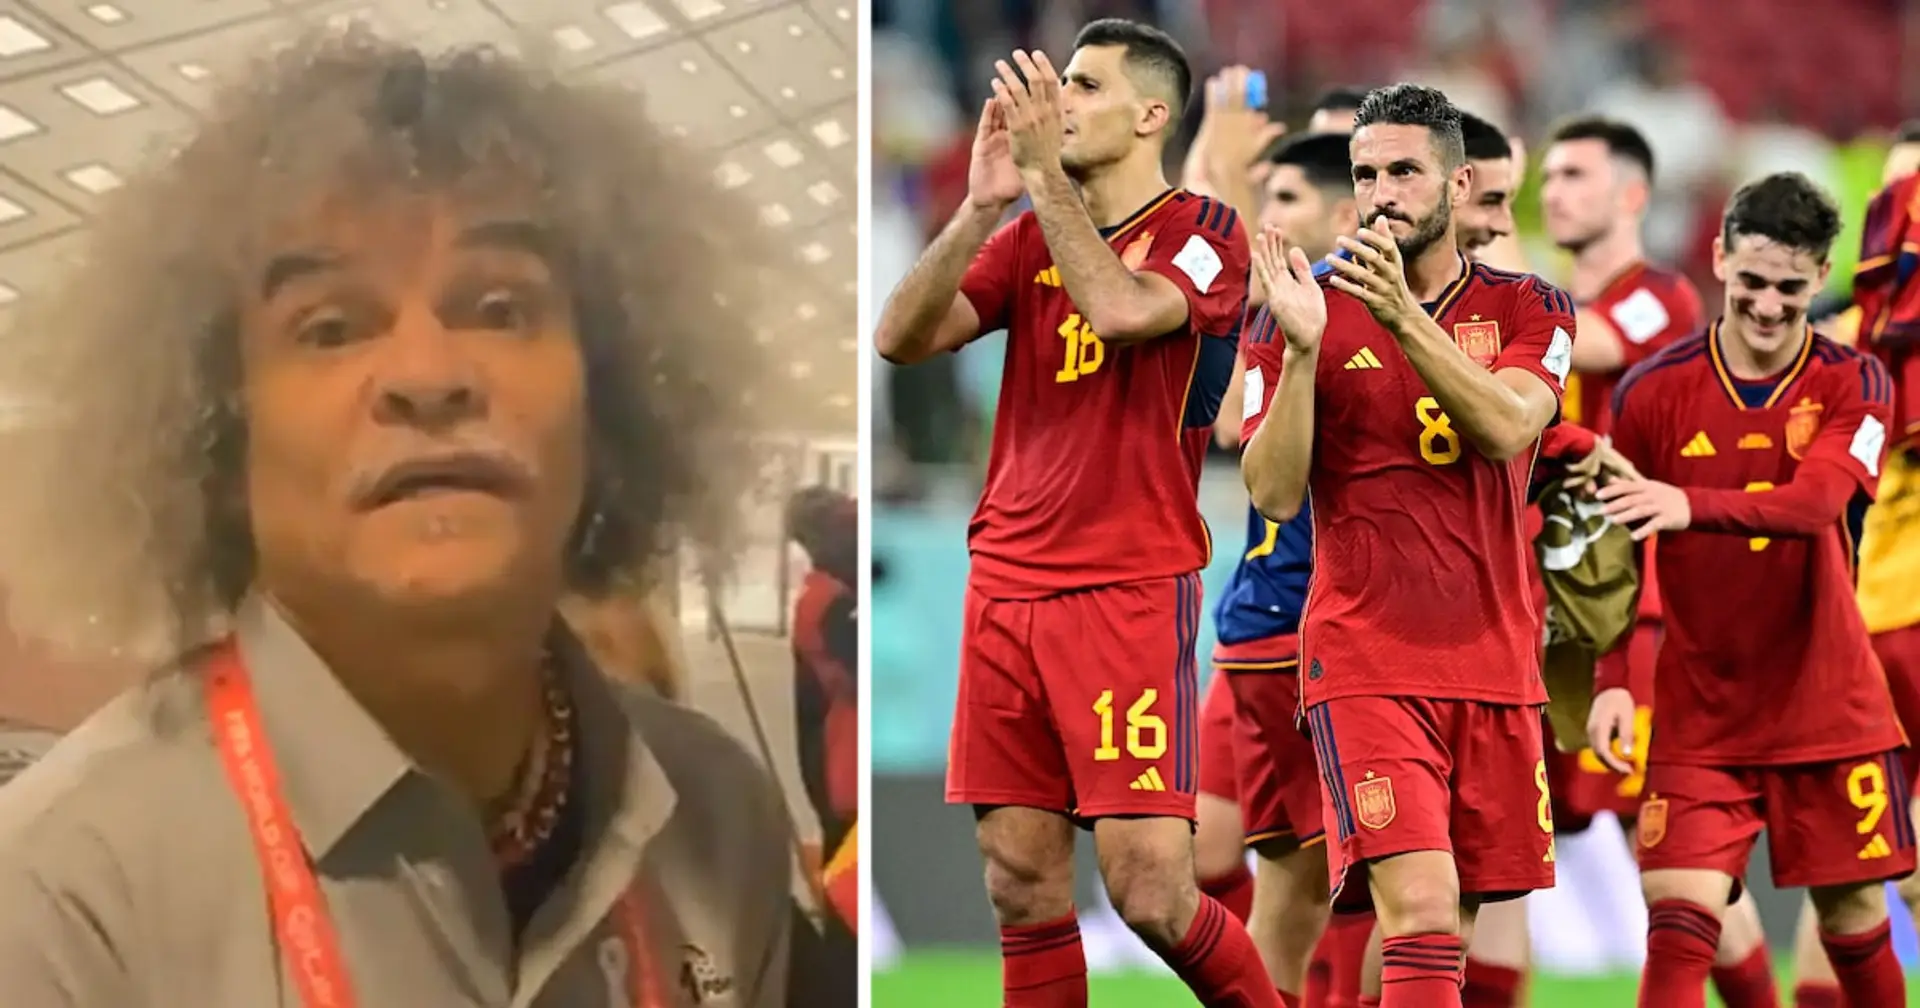 I want him to teach me football: Colombia icon Valderrama amazed by one Barca player after Costa Rica game